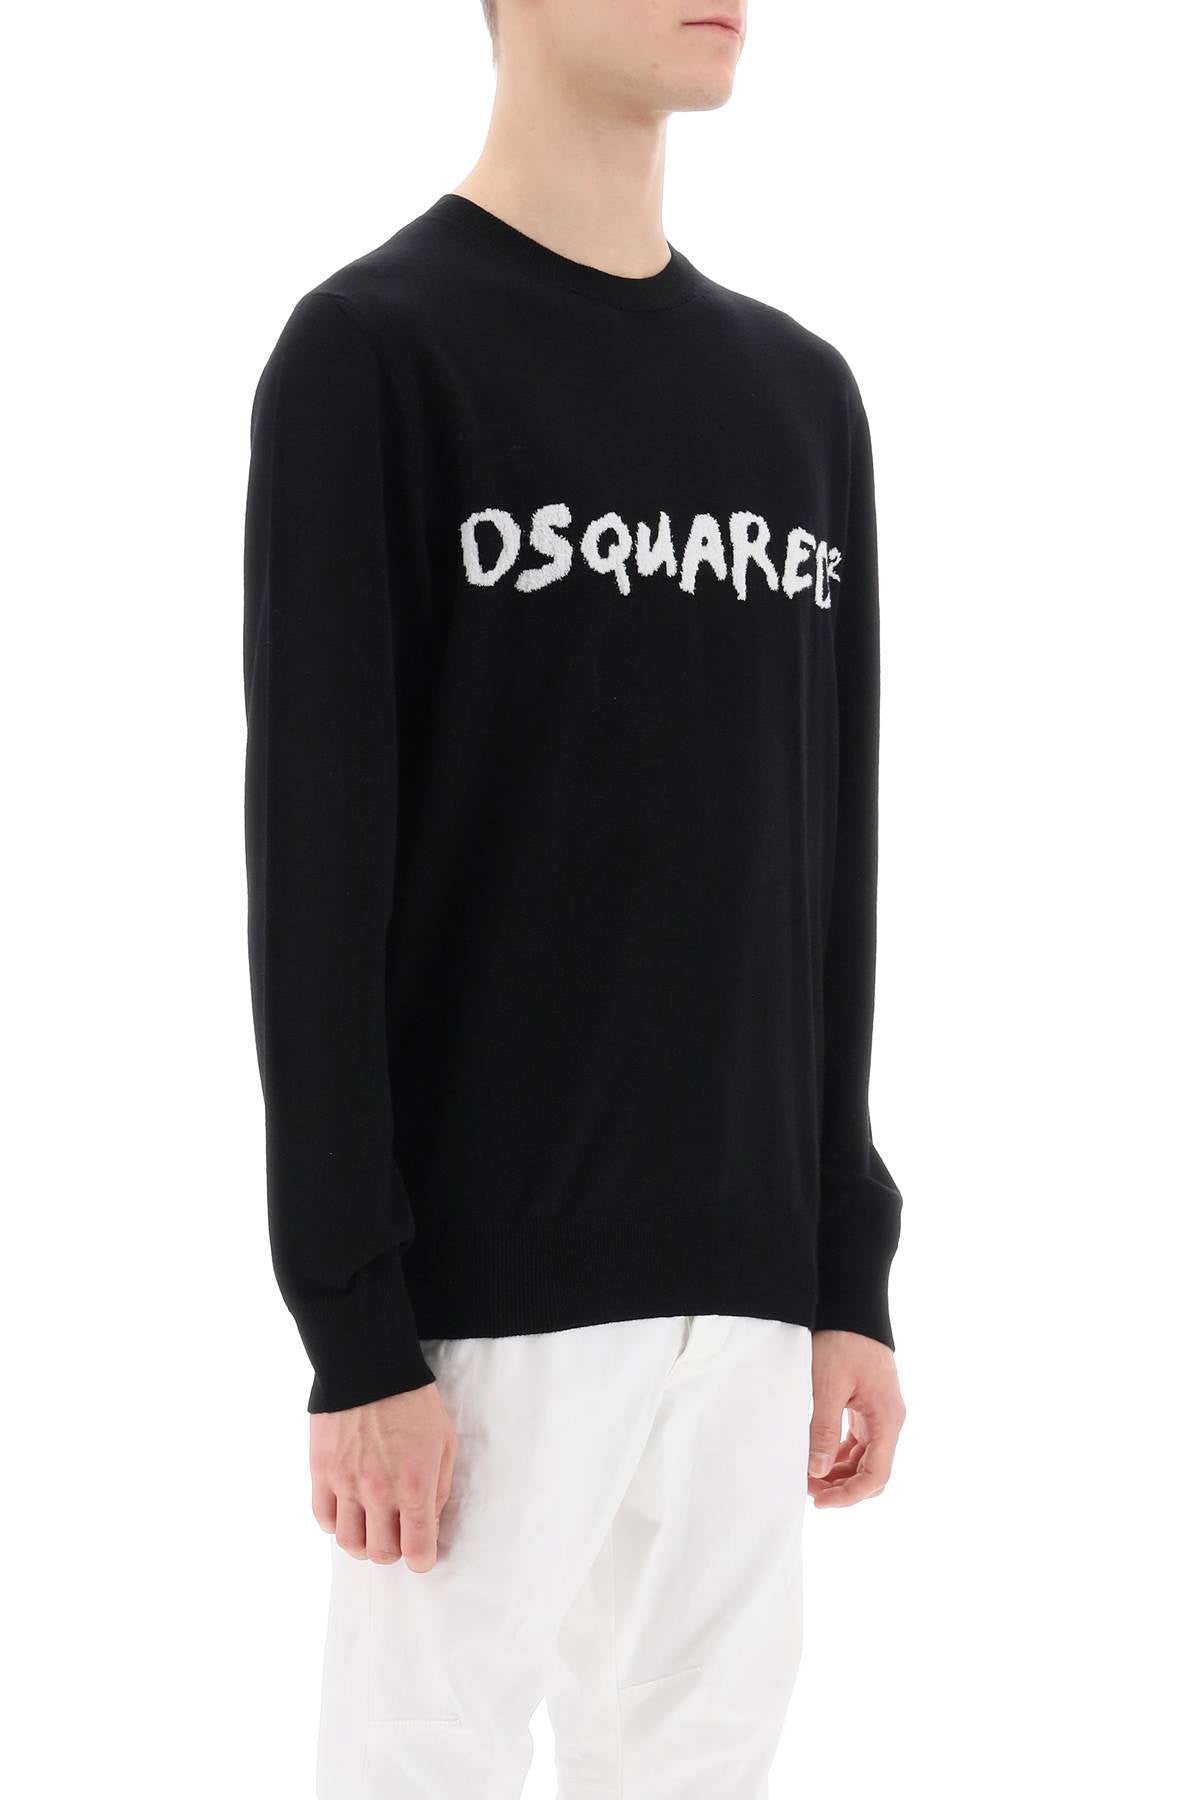 Dsquared2 Dsquared2 textured logo sweater